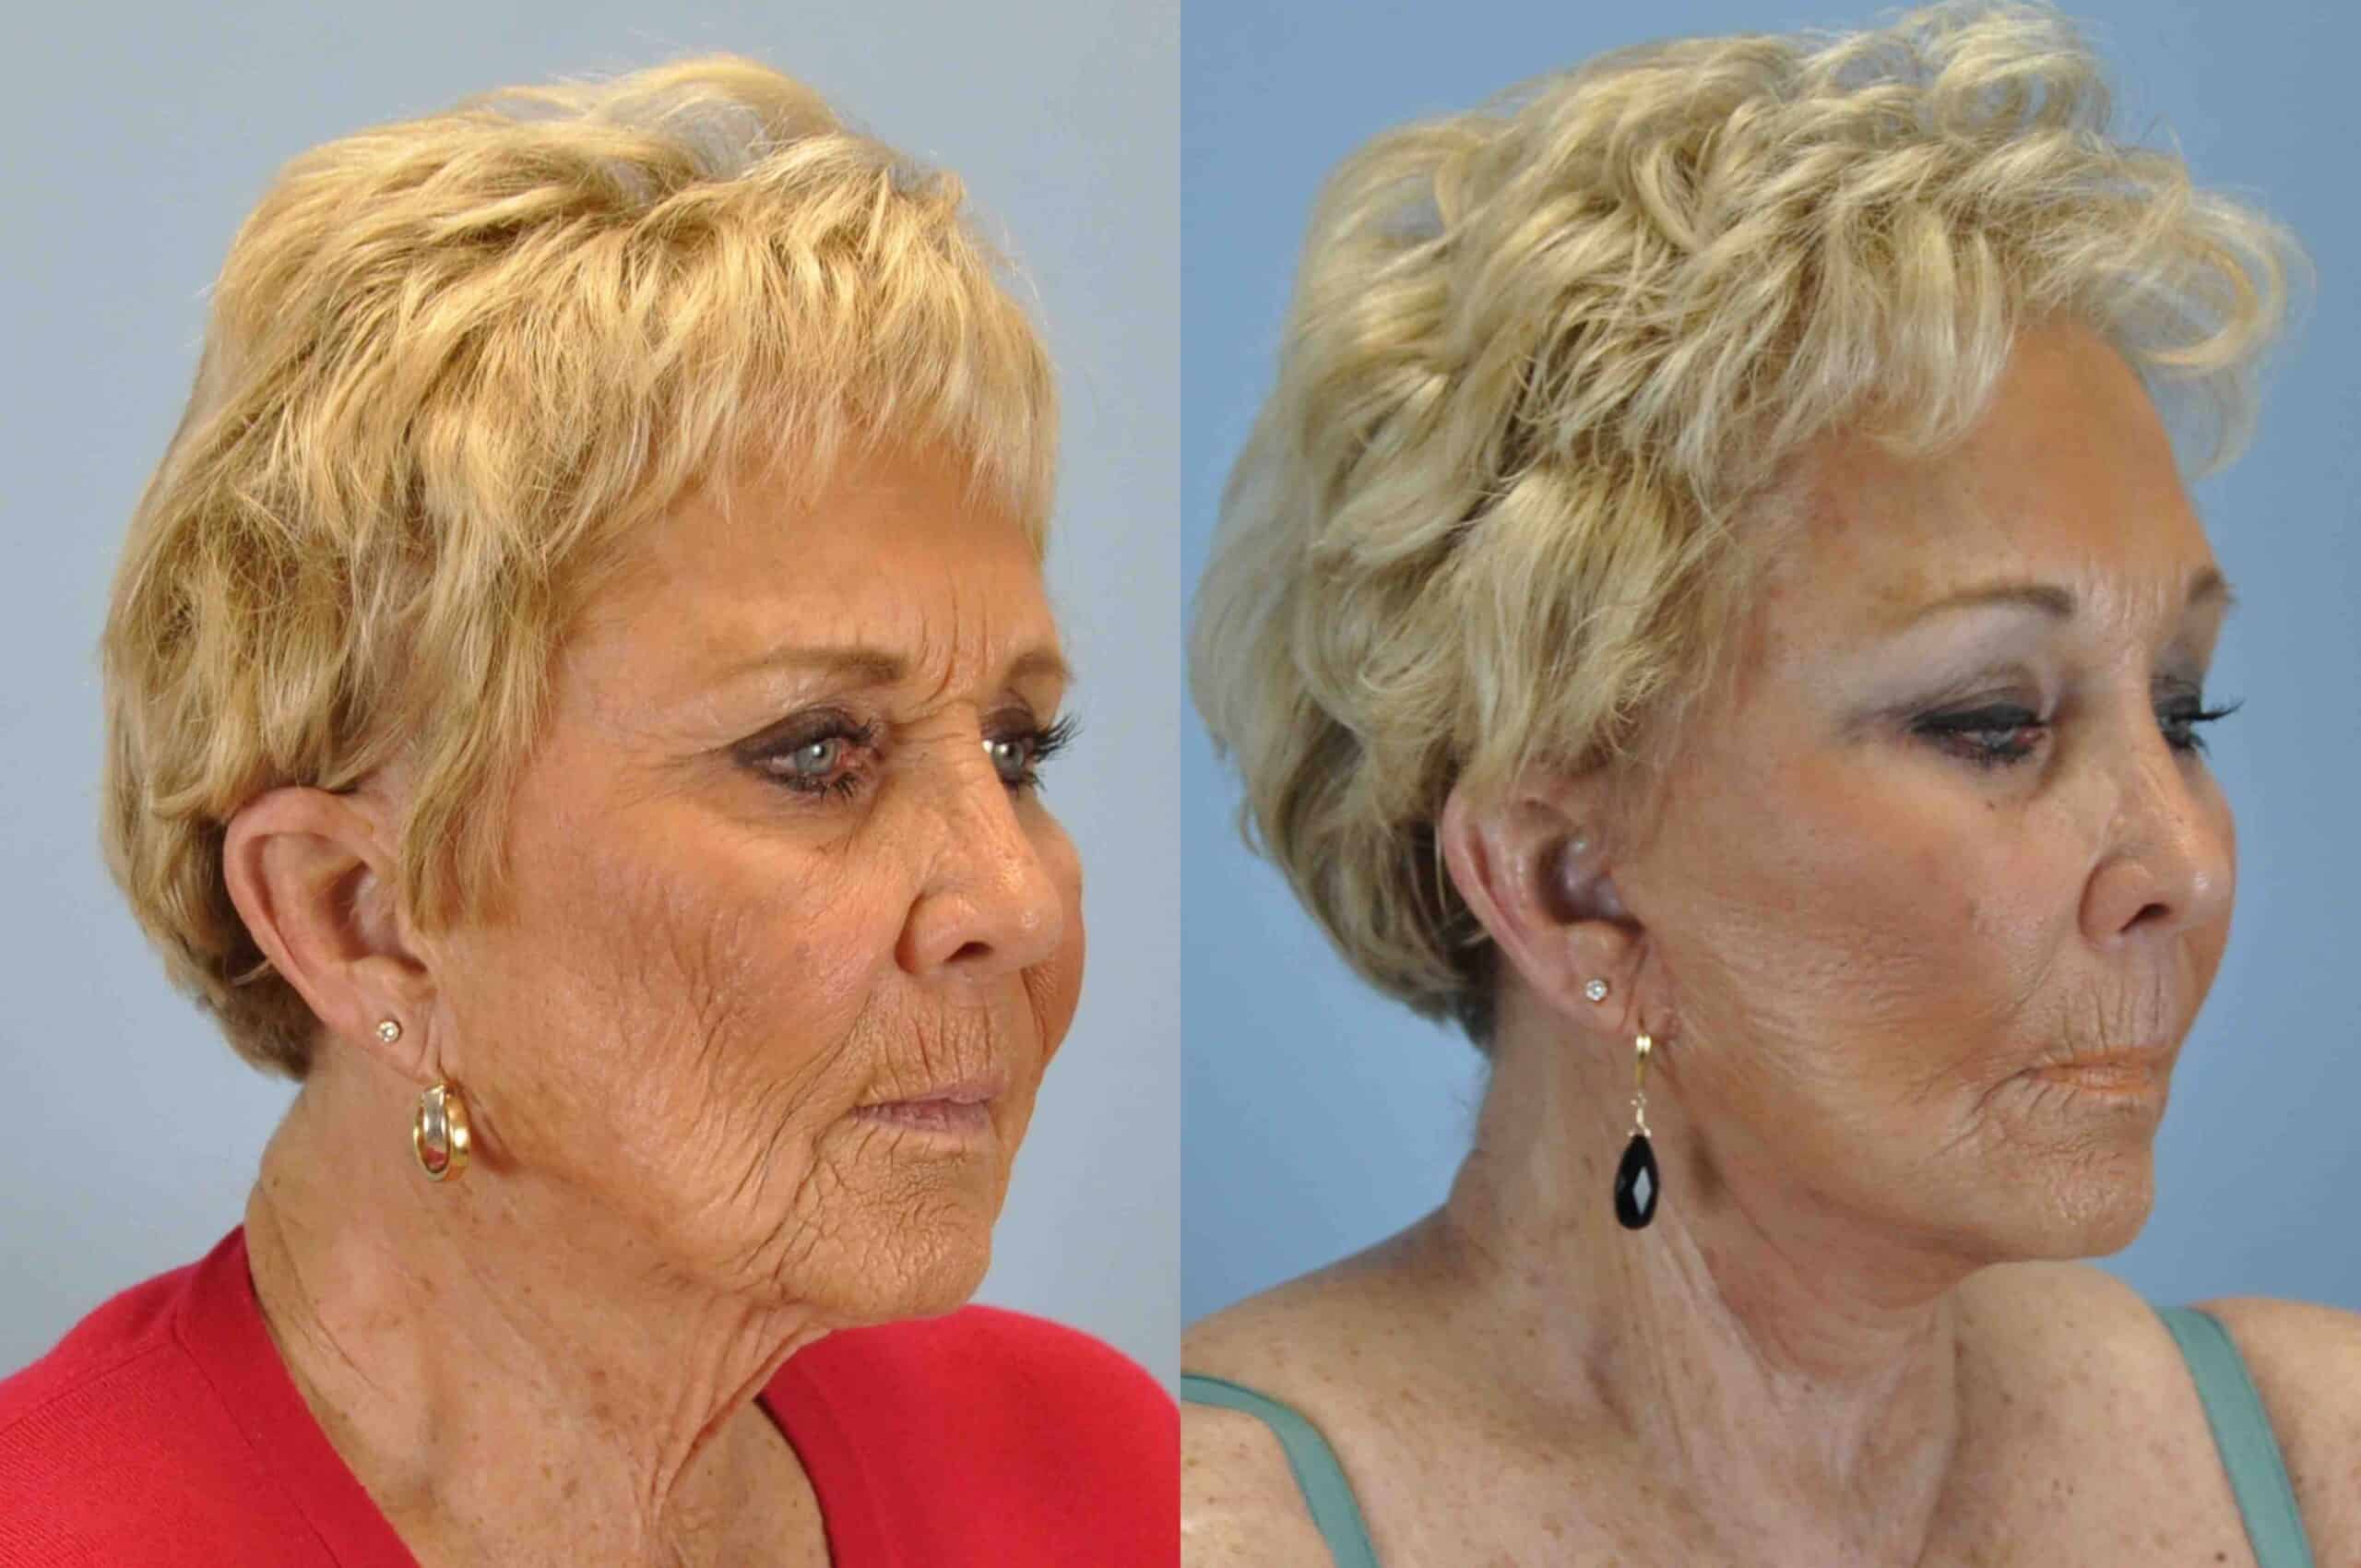 Before and after, 1 mo post op from Upper and Lower Blepharoplasty, Facelift, Neck Lift, Endo Brow Lift performed by Dr. Paul Vanek (diagonal view)